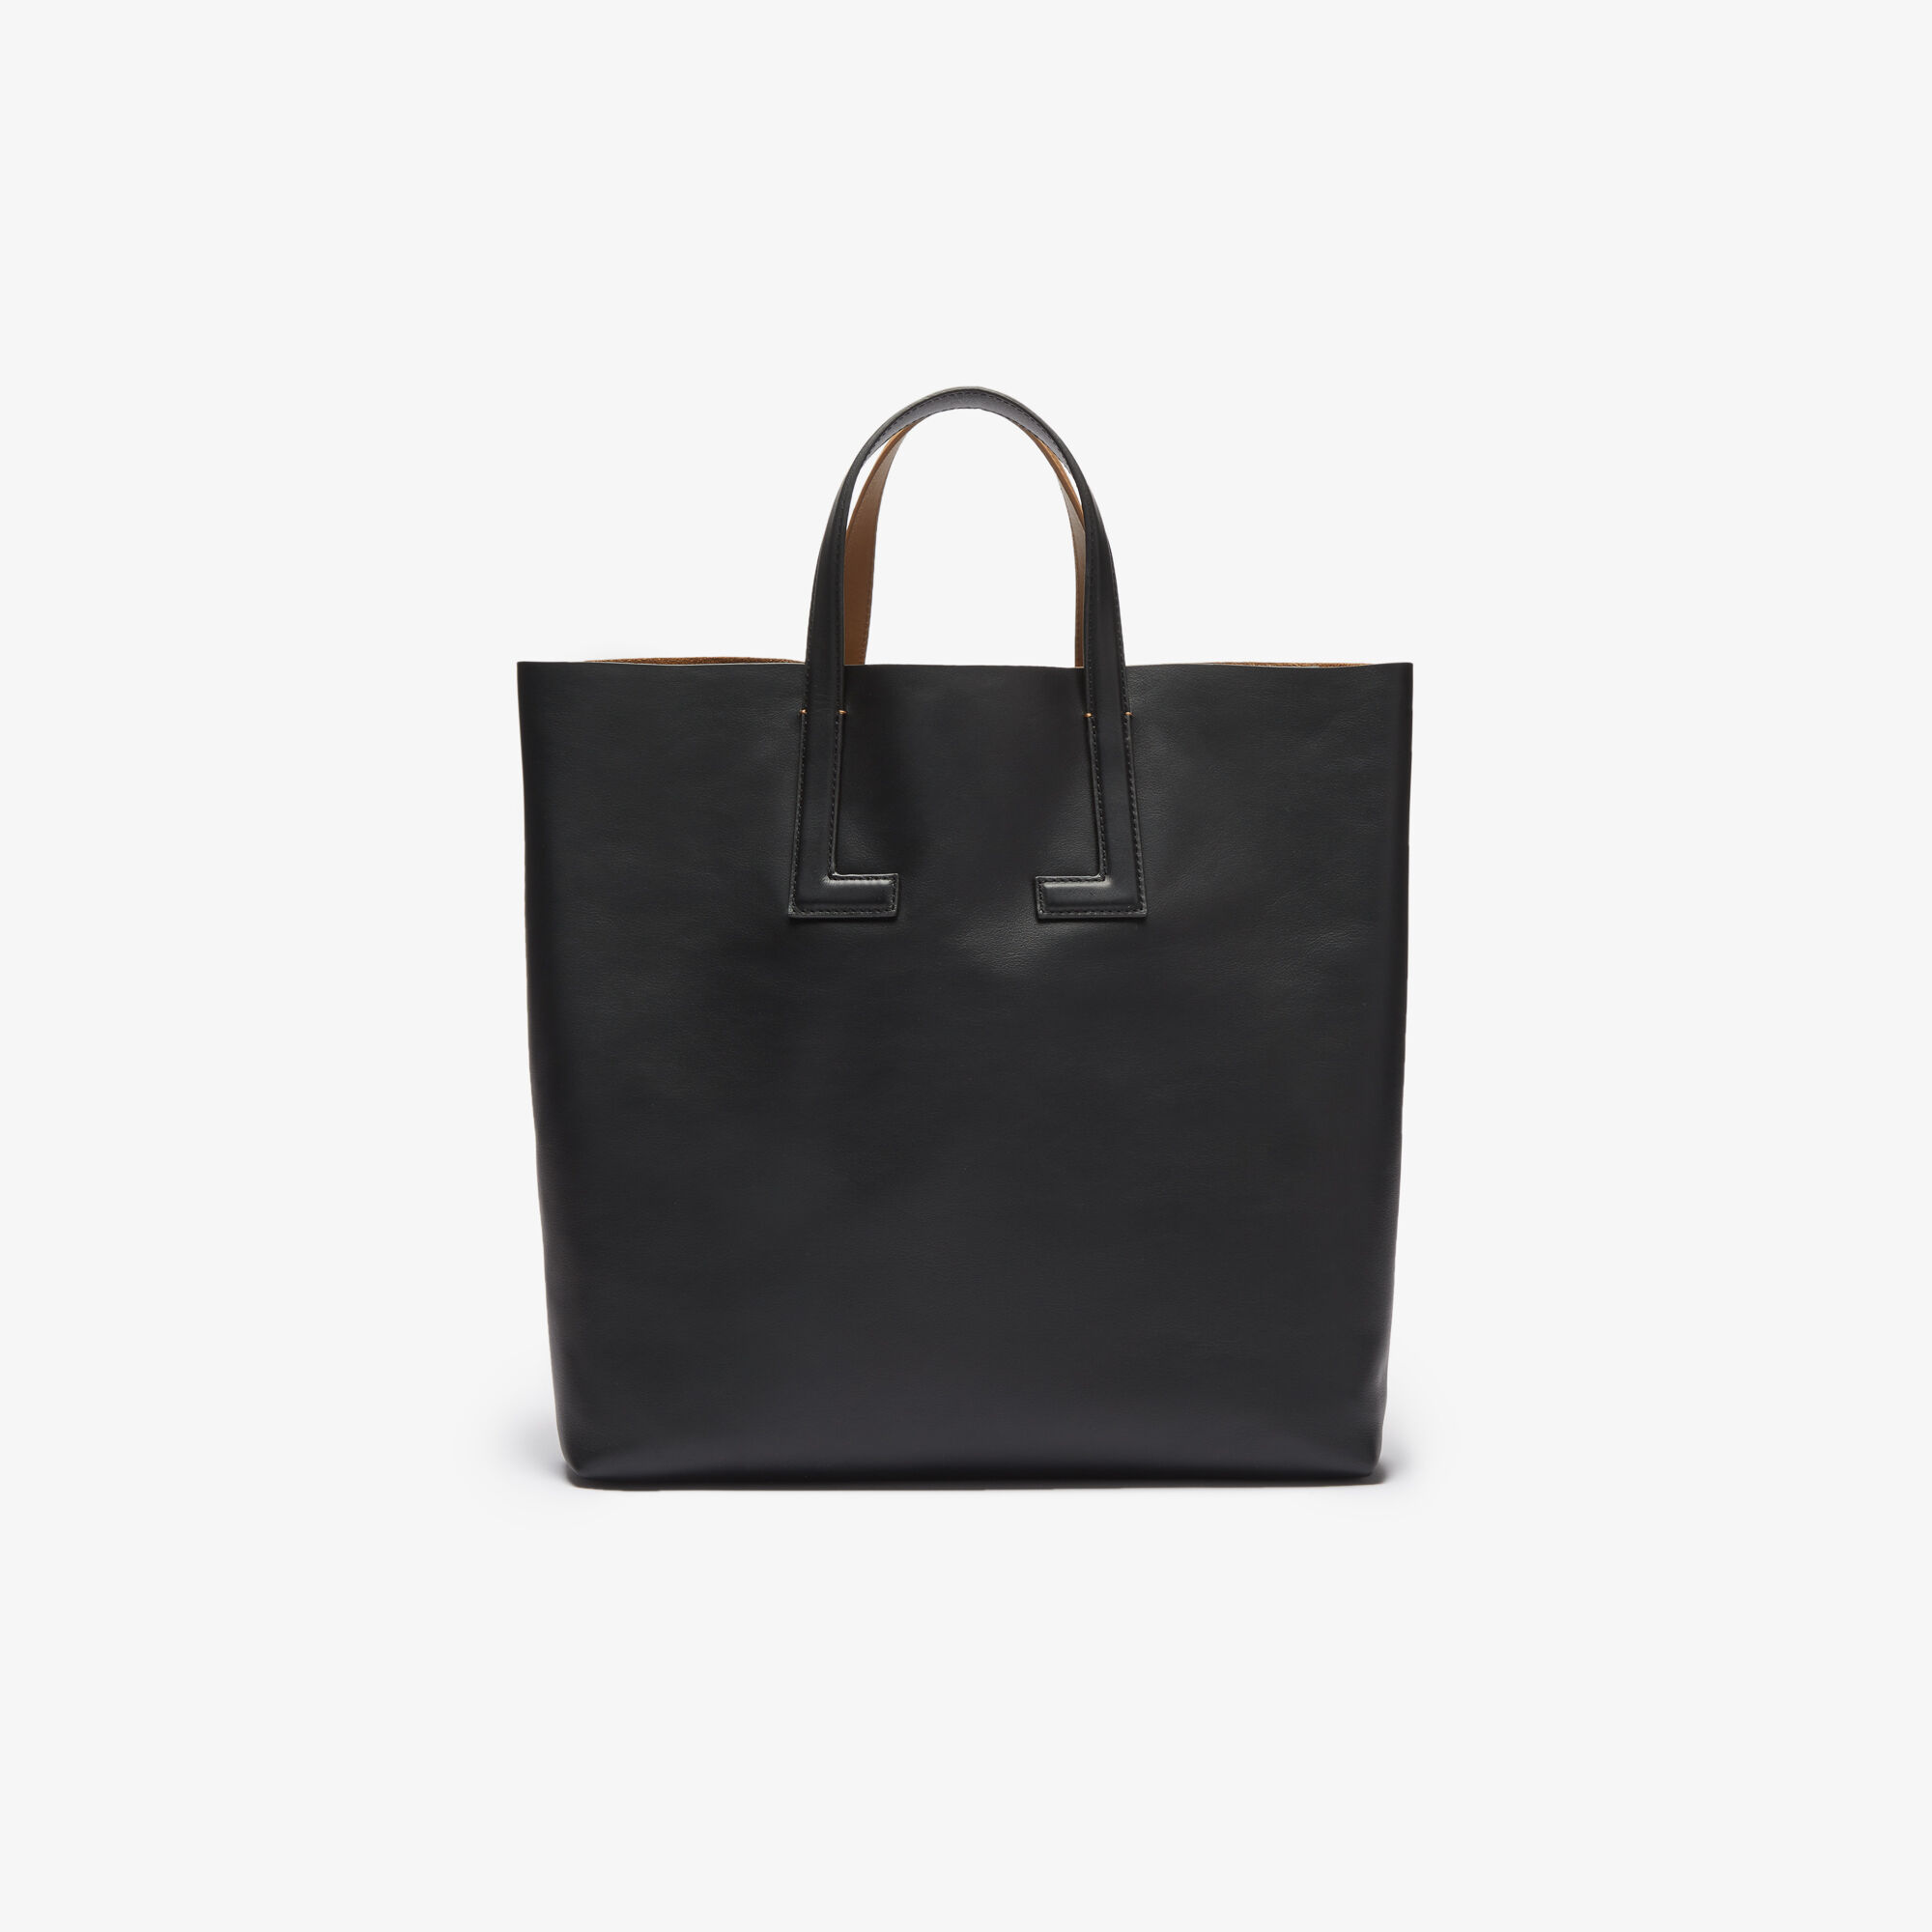 Women's Fashion Show Two-Tone Leather Double Tote